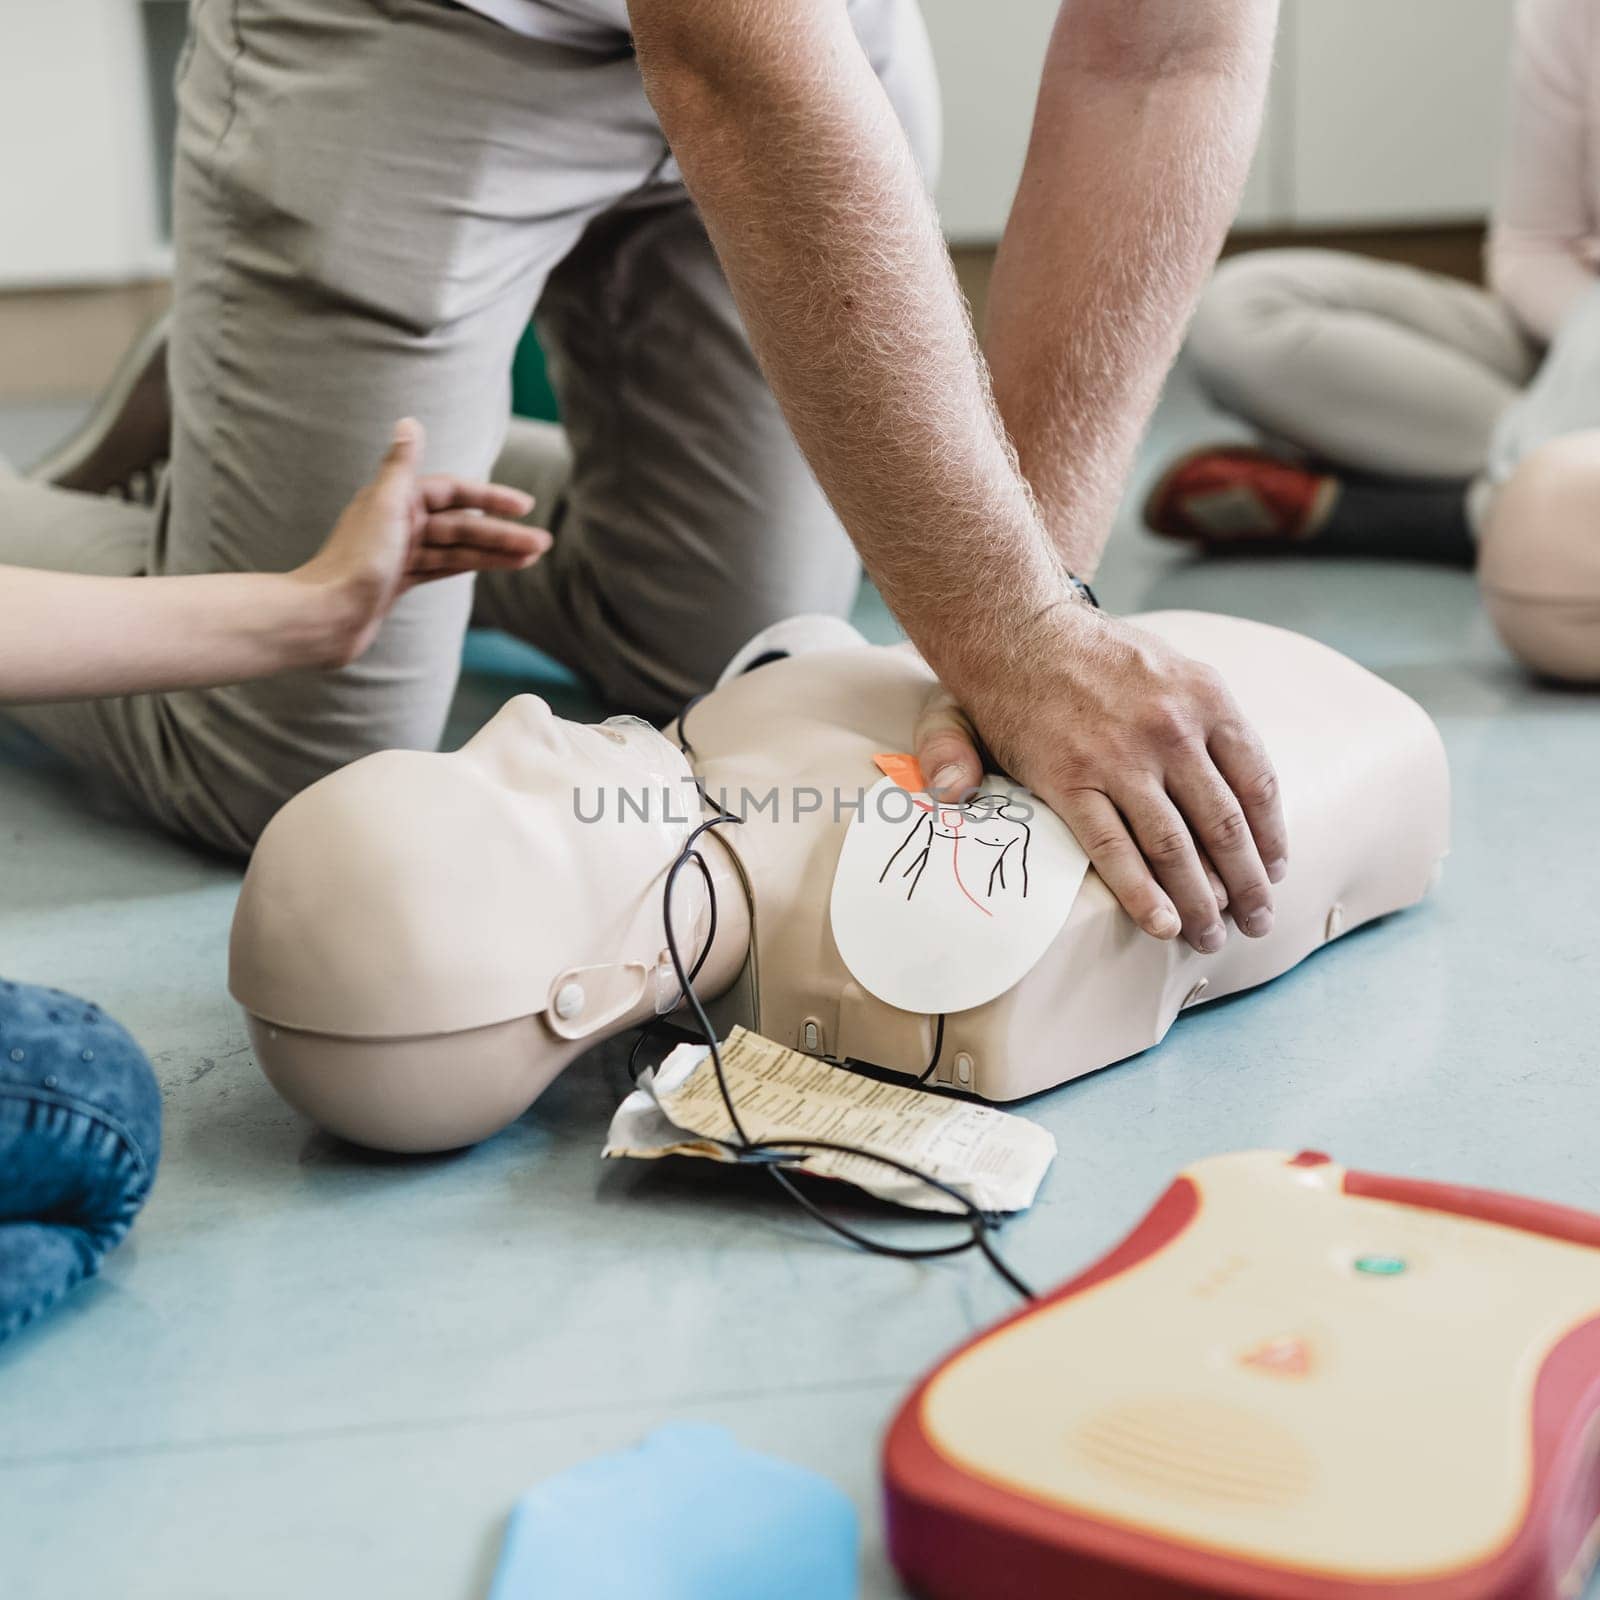 First aid resuscitation course using AED. by kasto